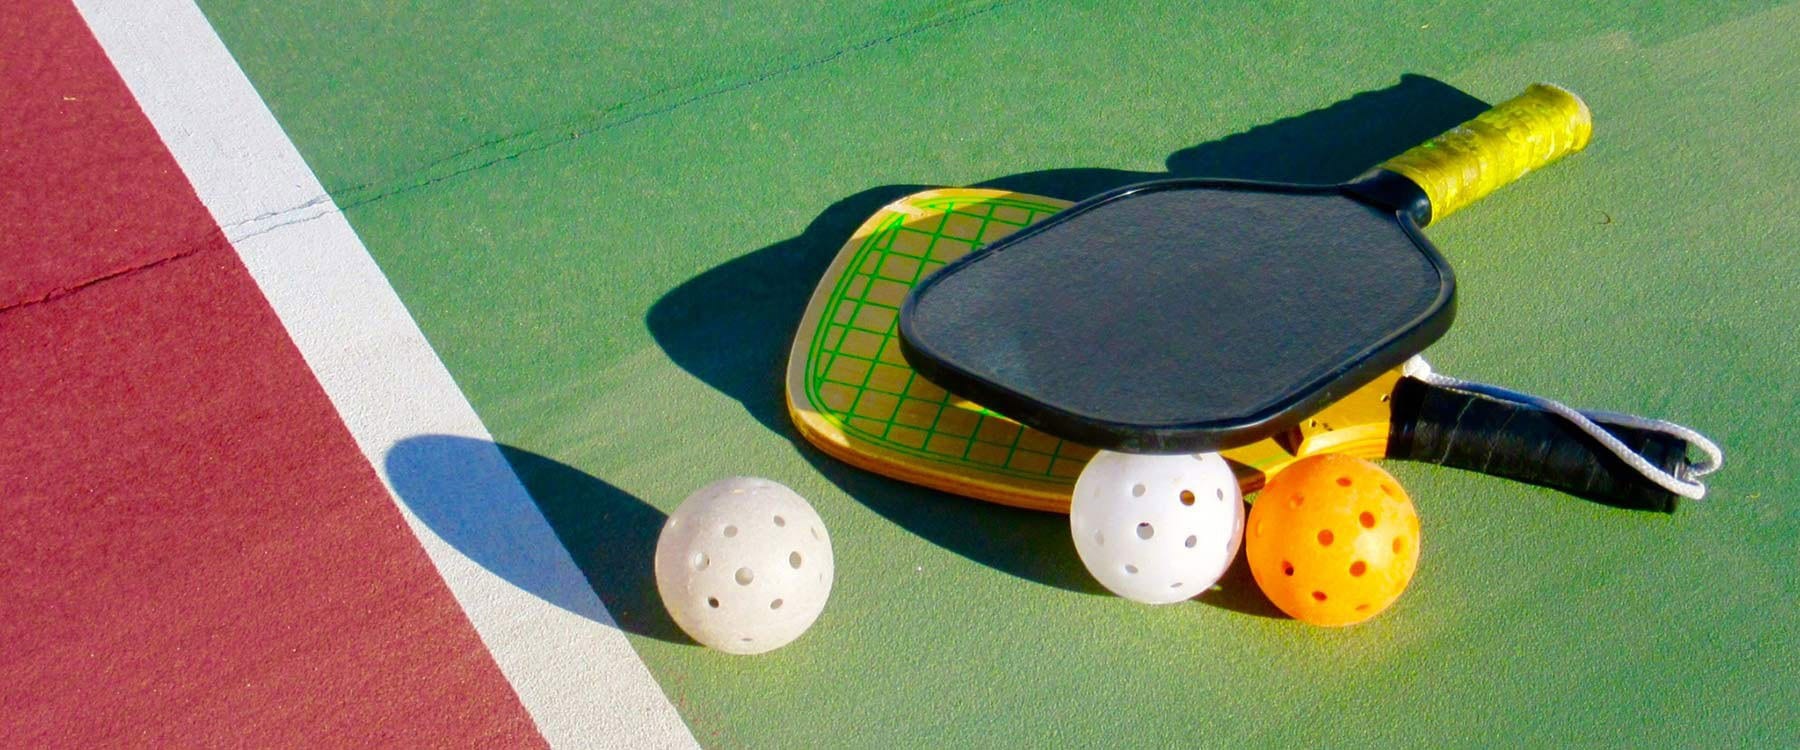 Pickle Ball for beginners or advanced players.